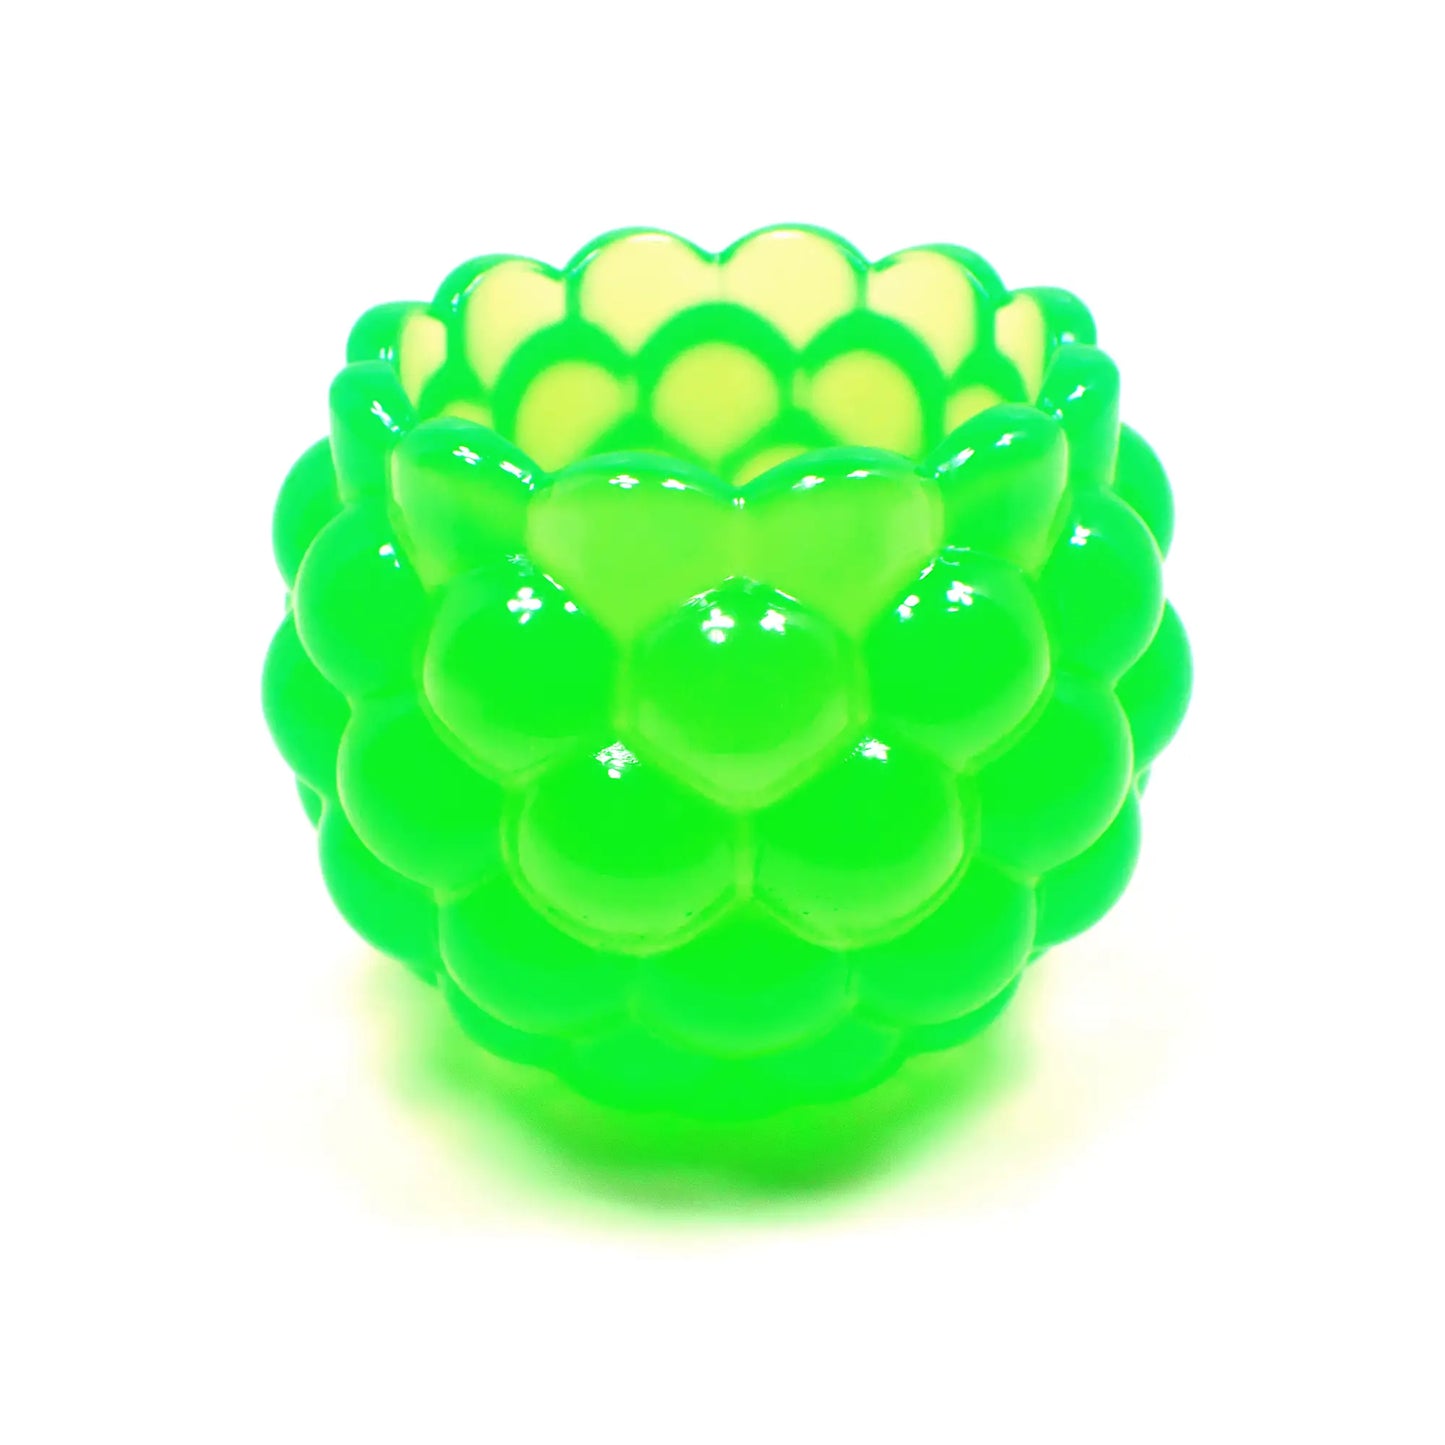 Small Handmade Round Bright Neon Green Resin Pot with Scalloped Edge